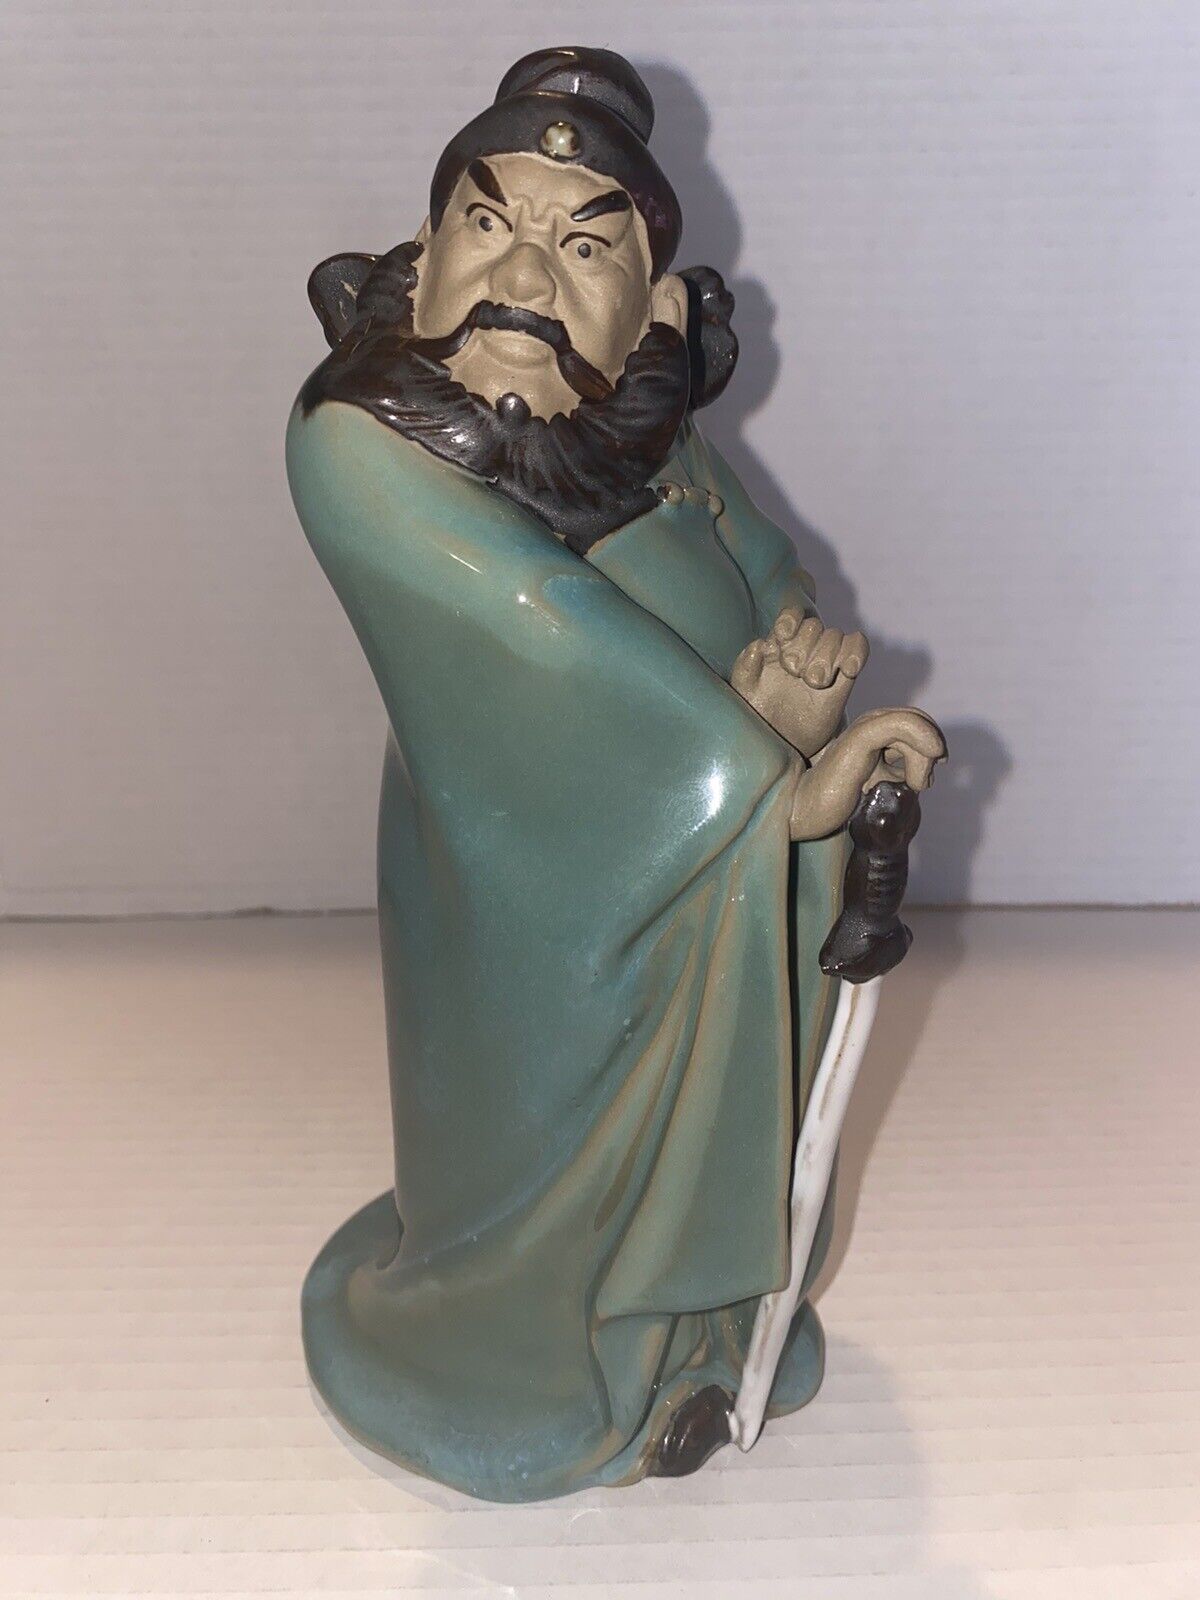 Chinese Porcelain Pottery Mudman Figurine Warrior With Sword 7 “ High Vintage